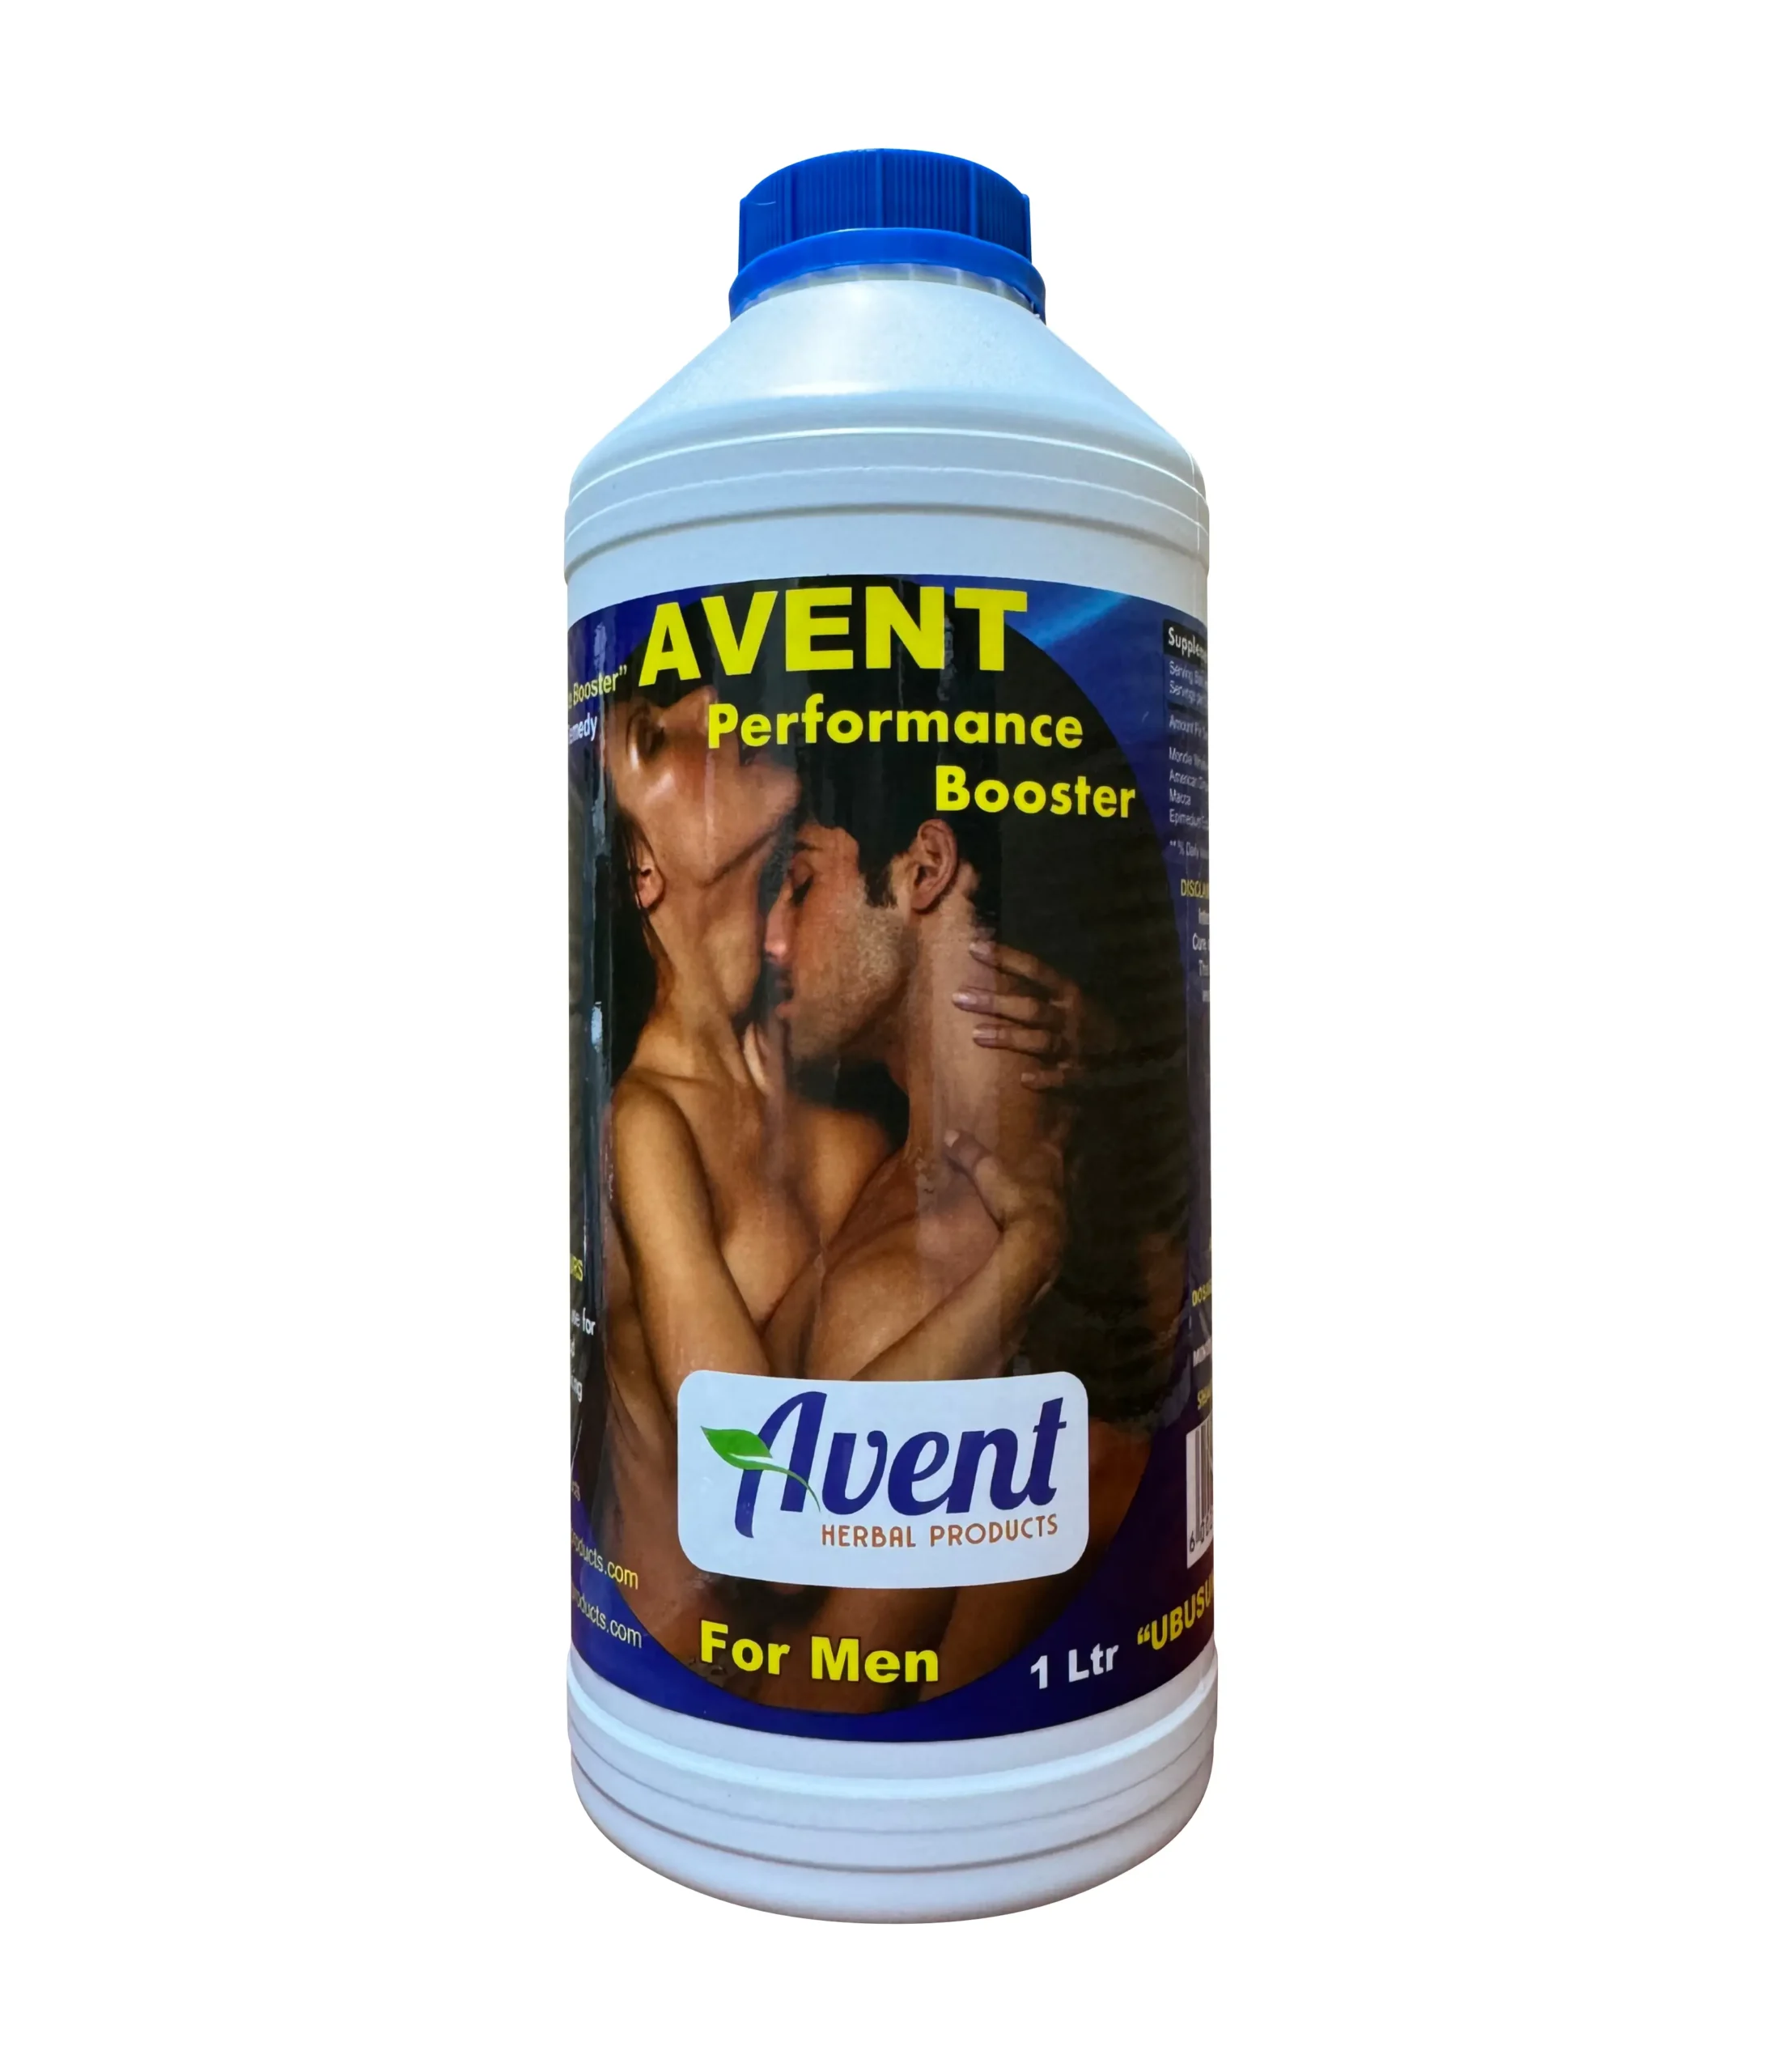 Avent Ultimate Performance Booster for Men